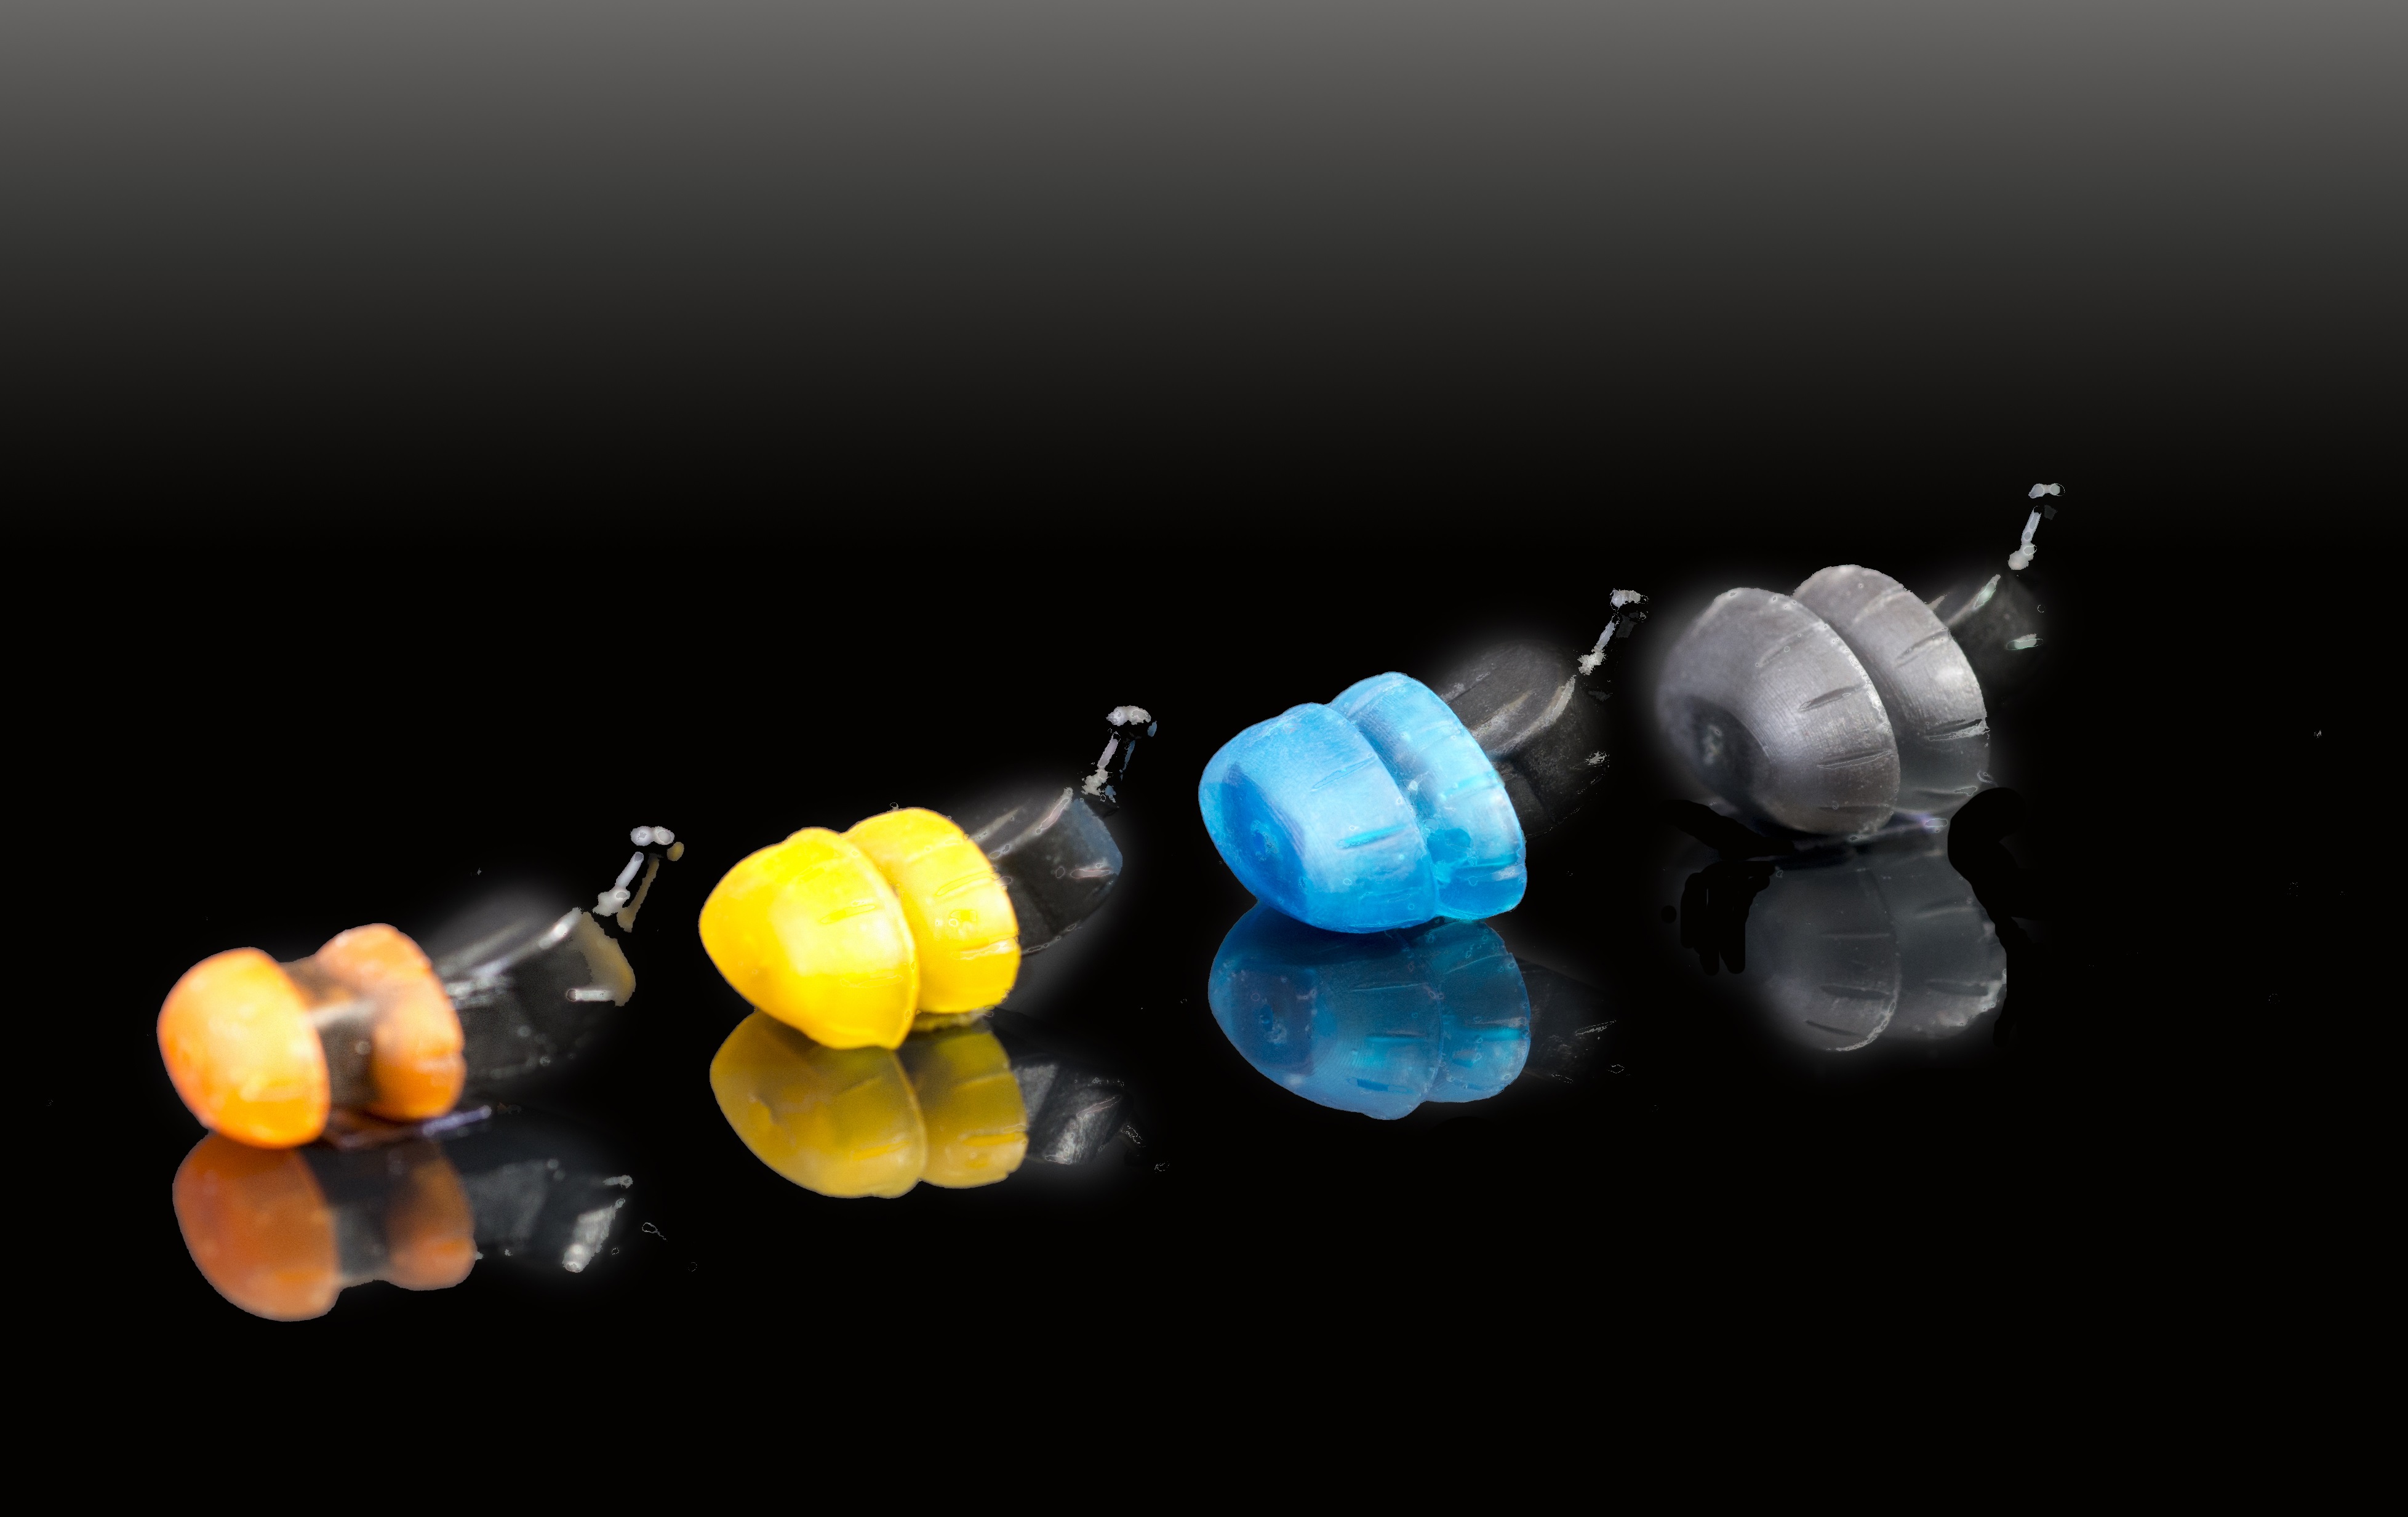 The iHear HD comes with an assortment of seal tips to fit a variety of ear sizes.